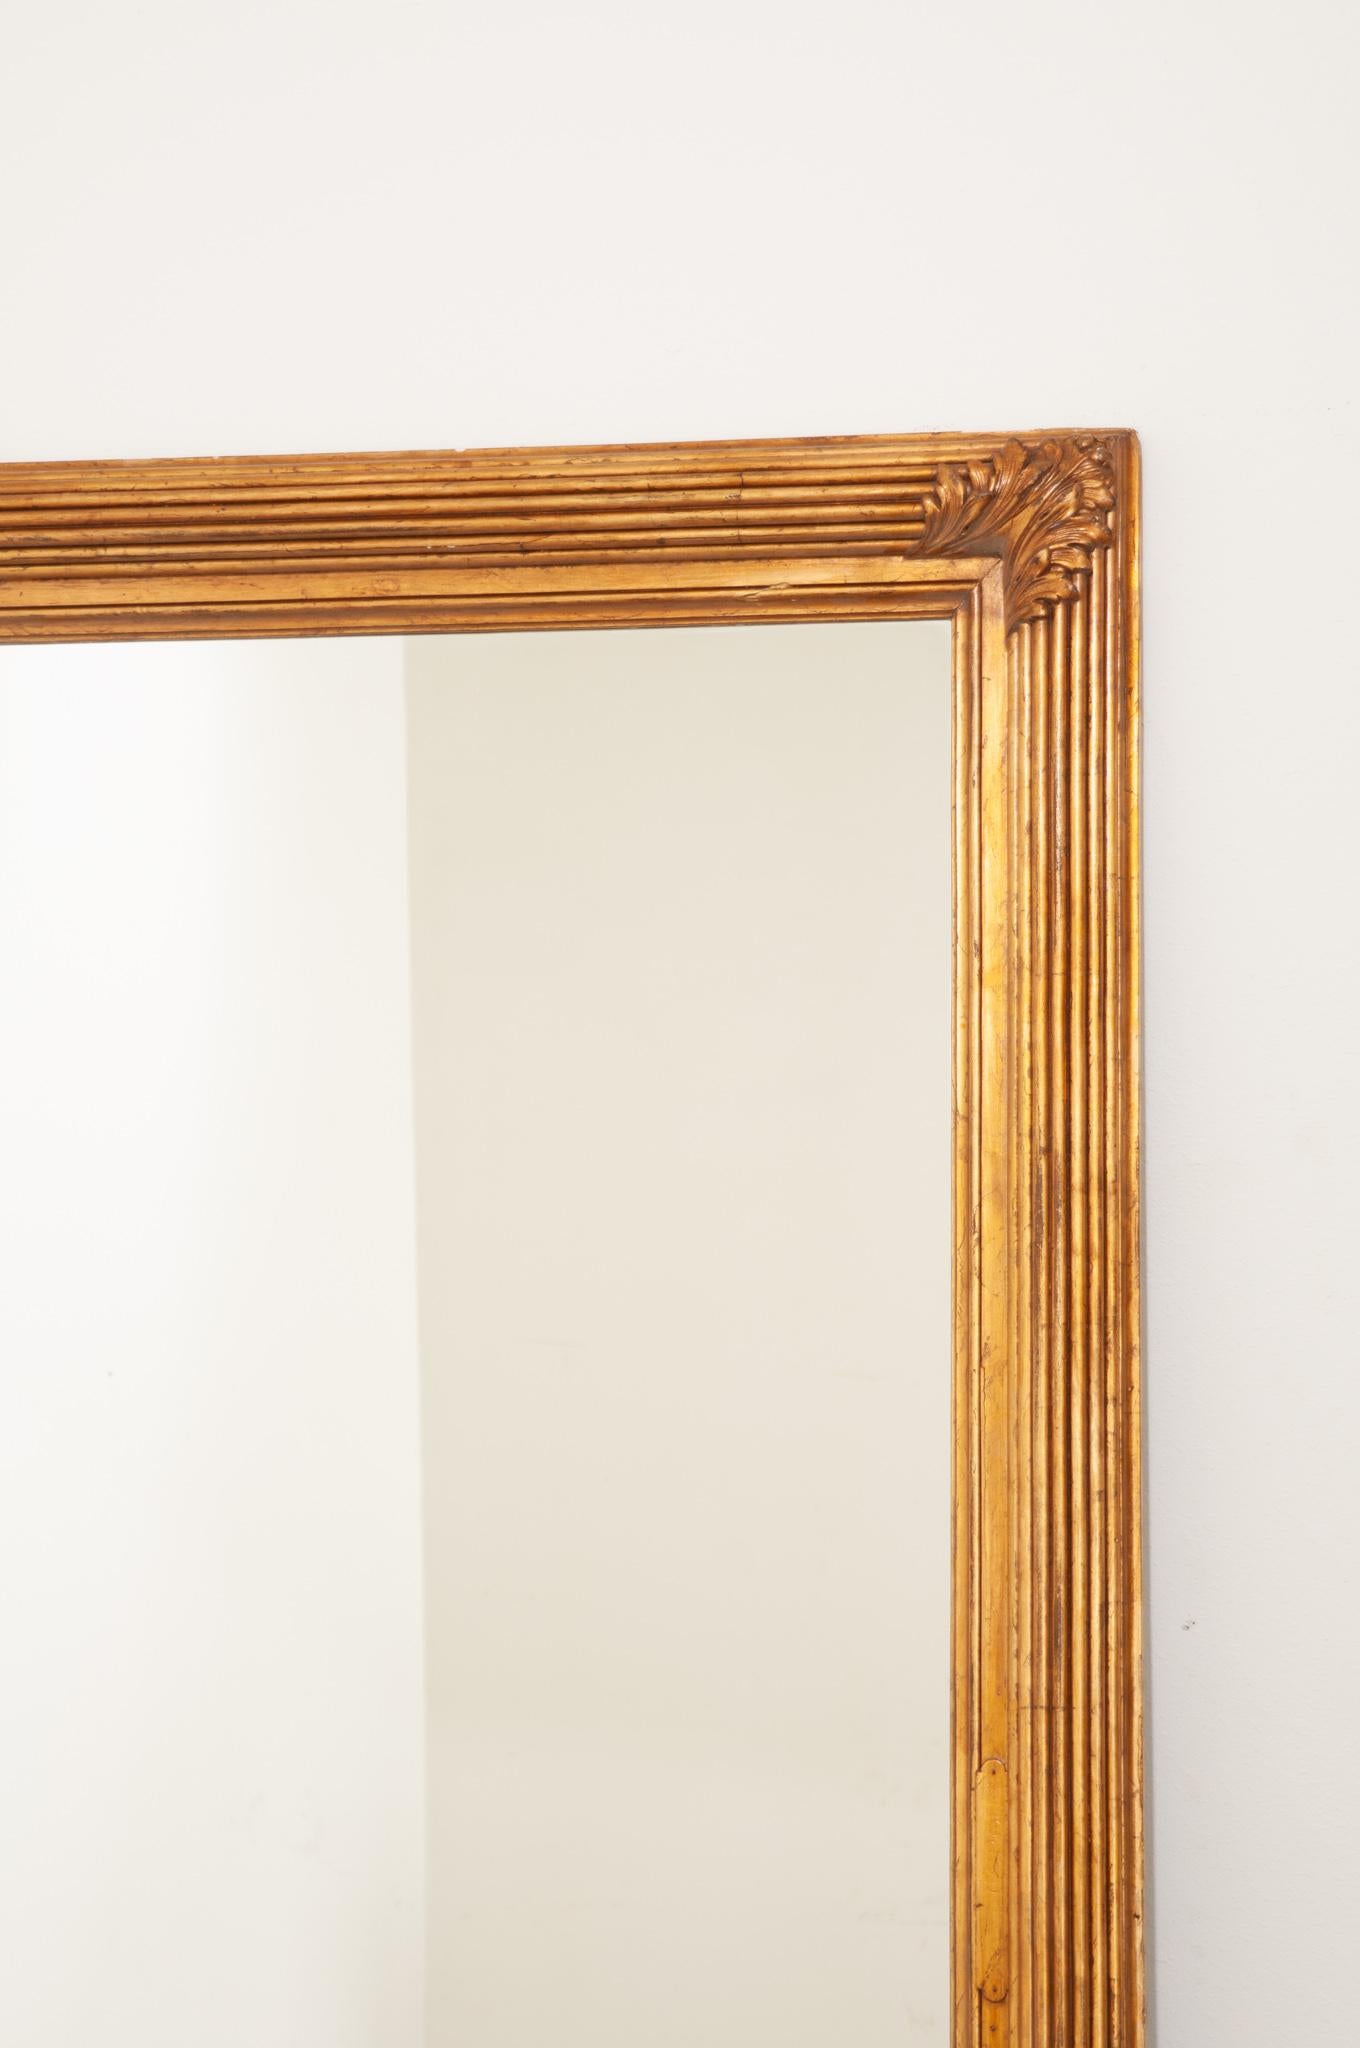 Hand-Carved French Massive Painted Gold Framed Mirror For Sale